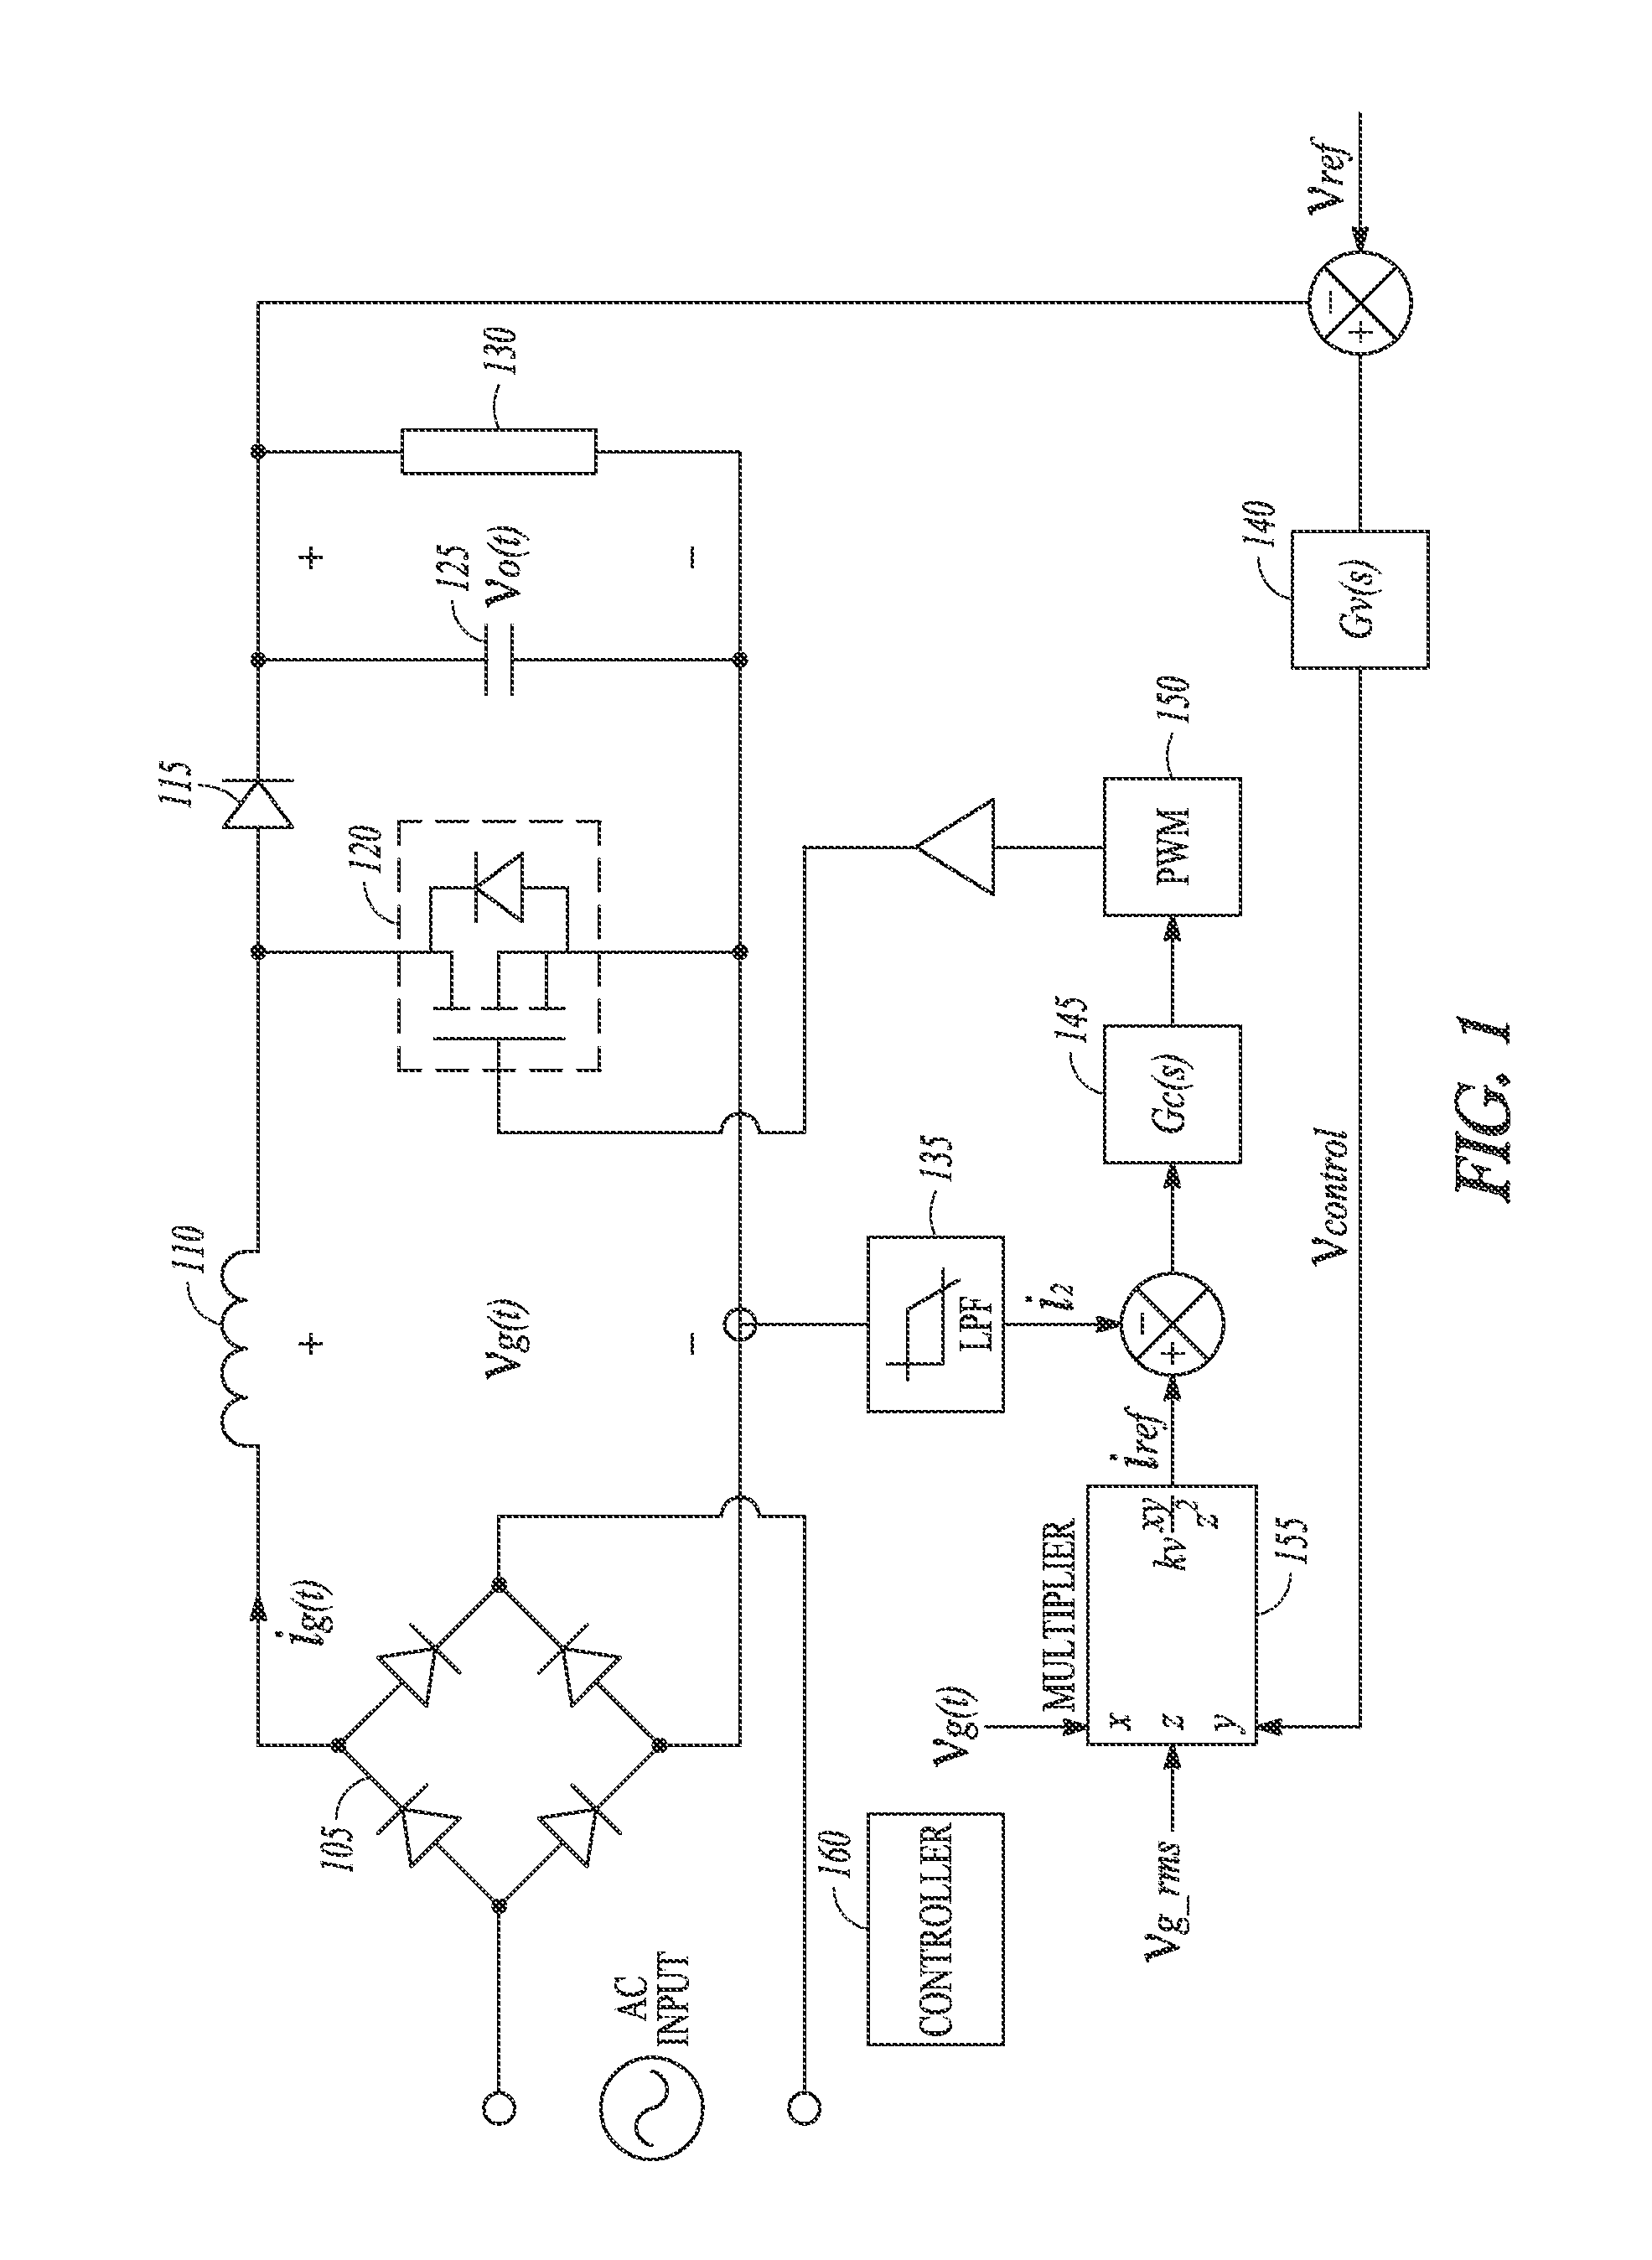 Auto-tuning current loop compensation for power factor correction controller